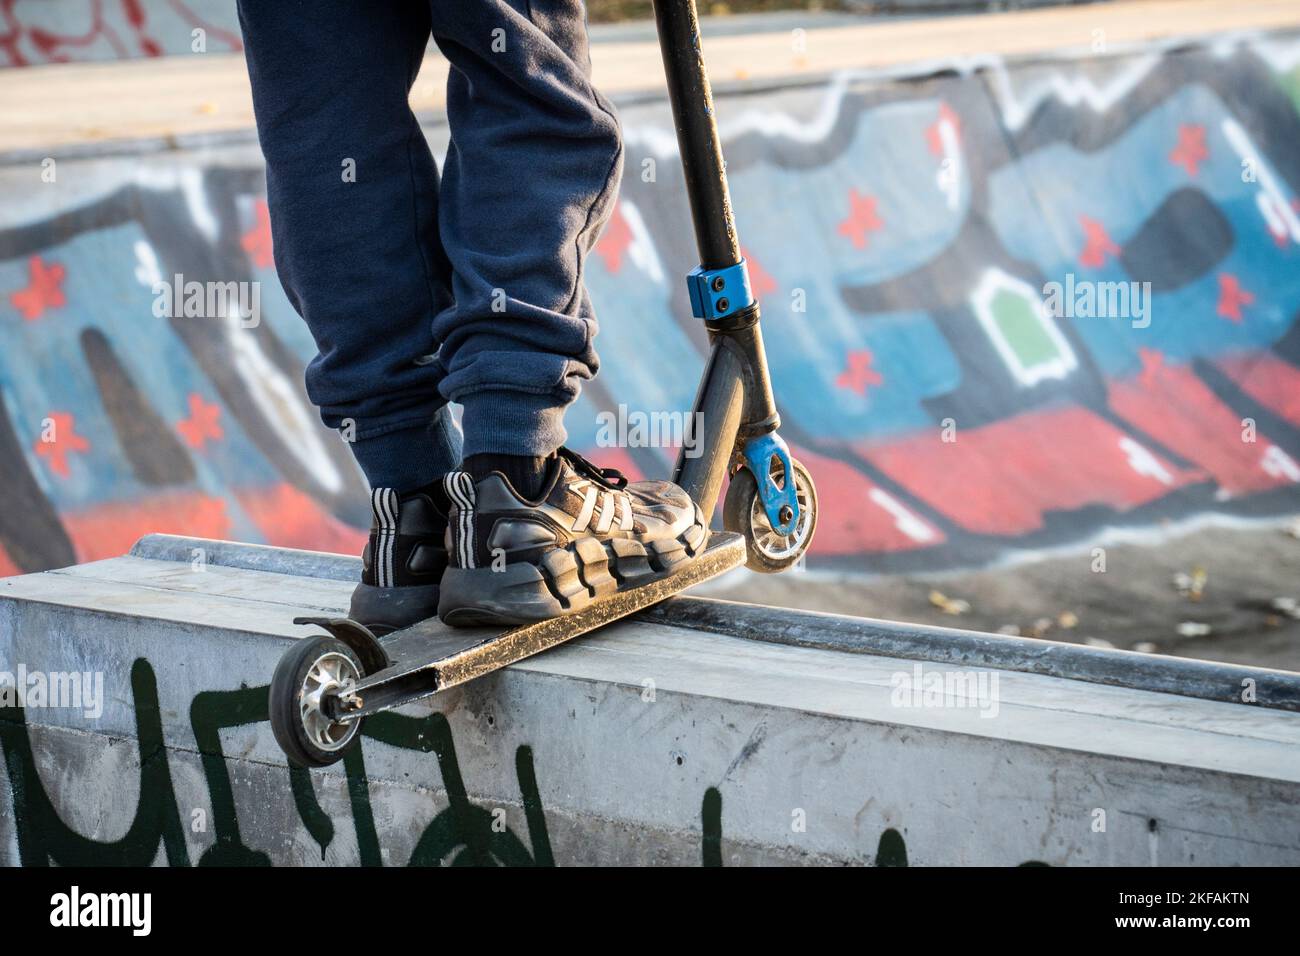 Selective cropping of a young skater practicing at a skate park. Stock Photo